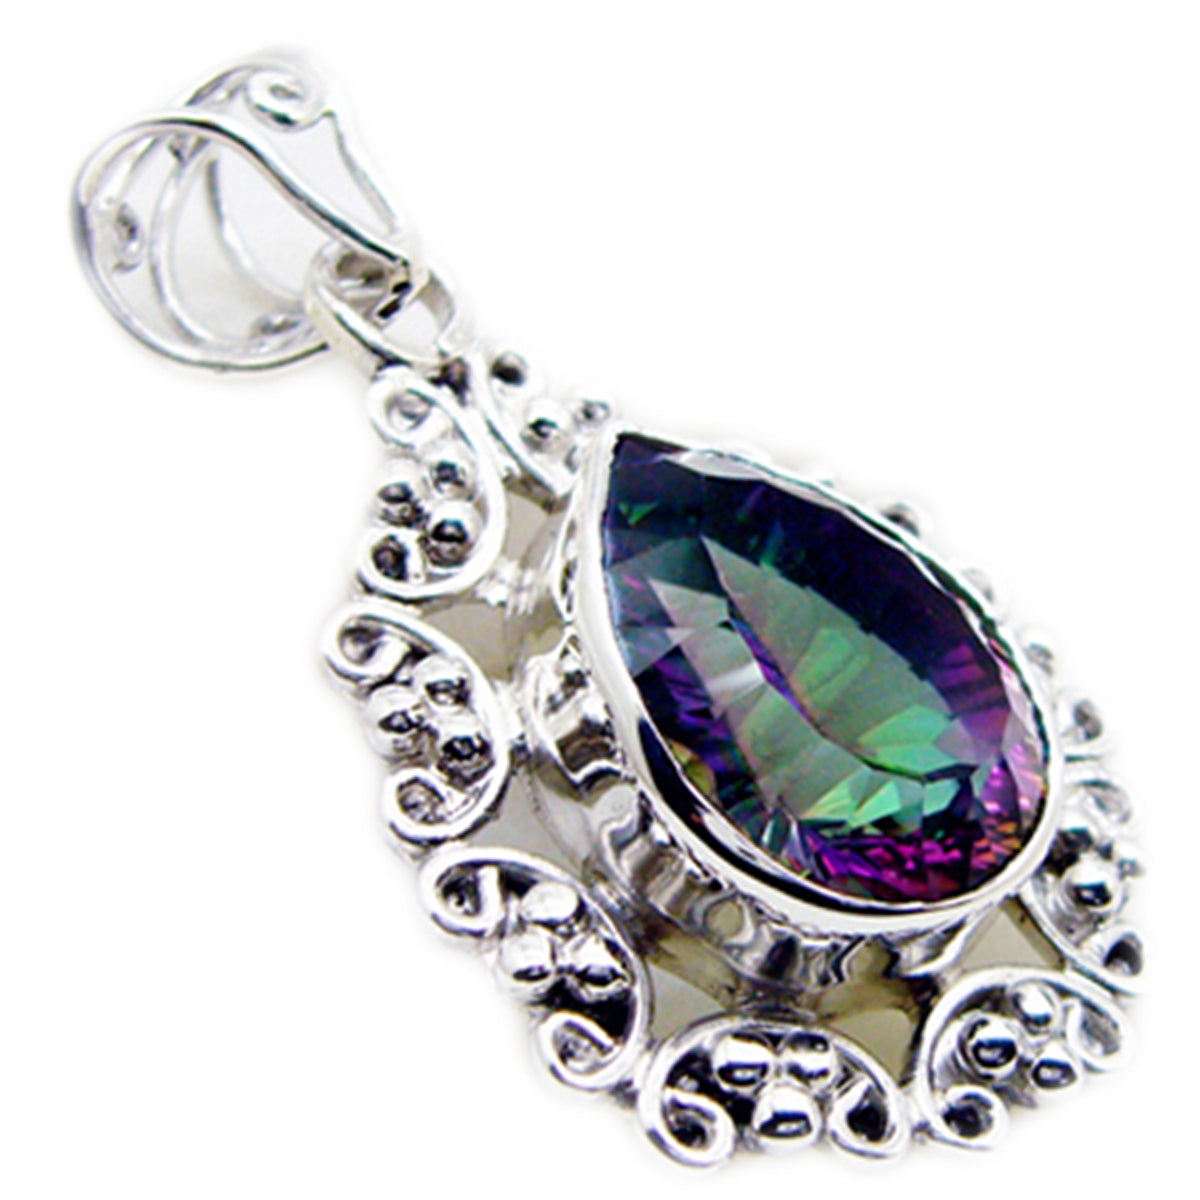 Riyo Genuine Gems Pear Faceted Multi Color Mystic Quartz Sterling Silver Pendants gift for mother's day